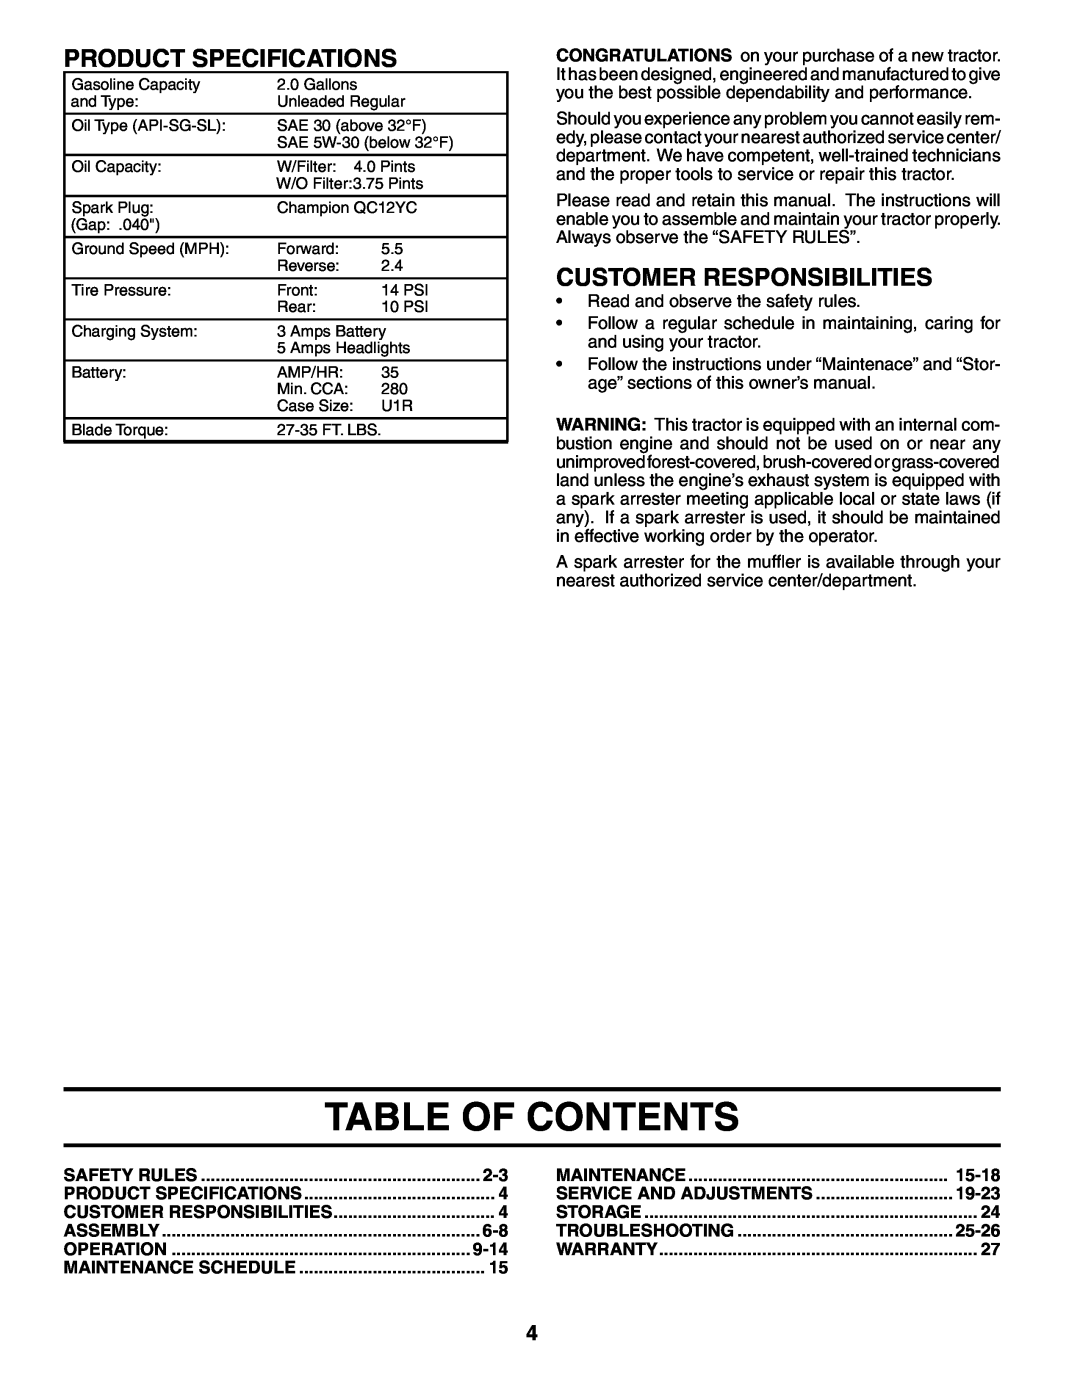 Poulan 195620 manual Table Of Contents, Product Specifications, Customer Responsibilities 